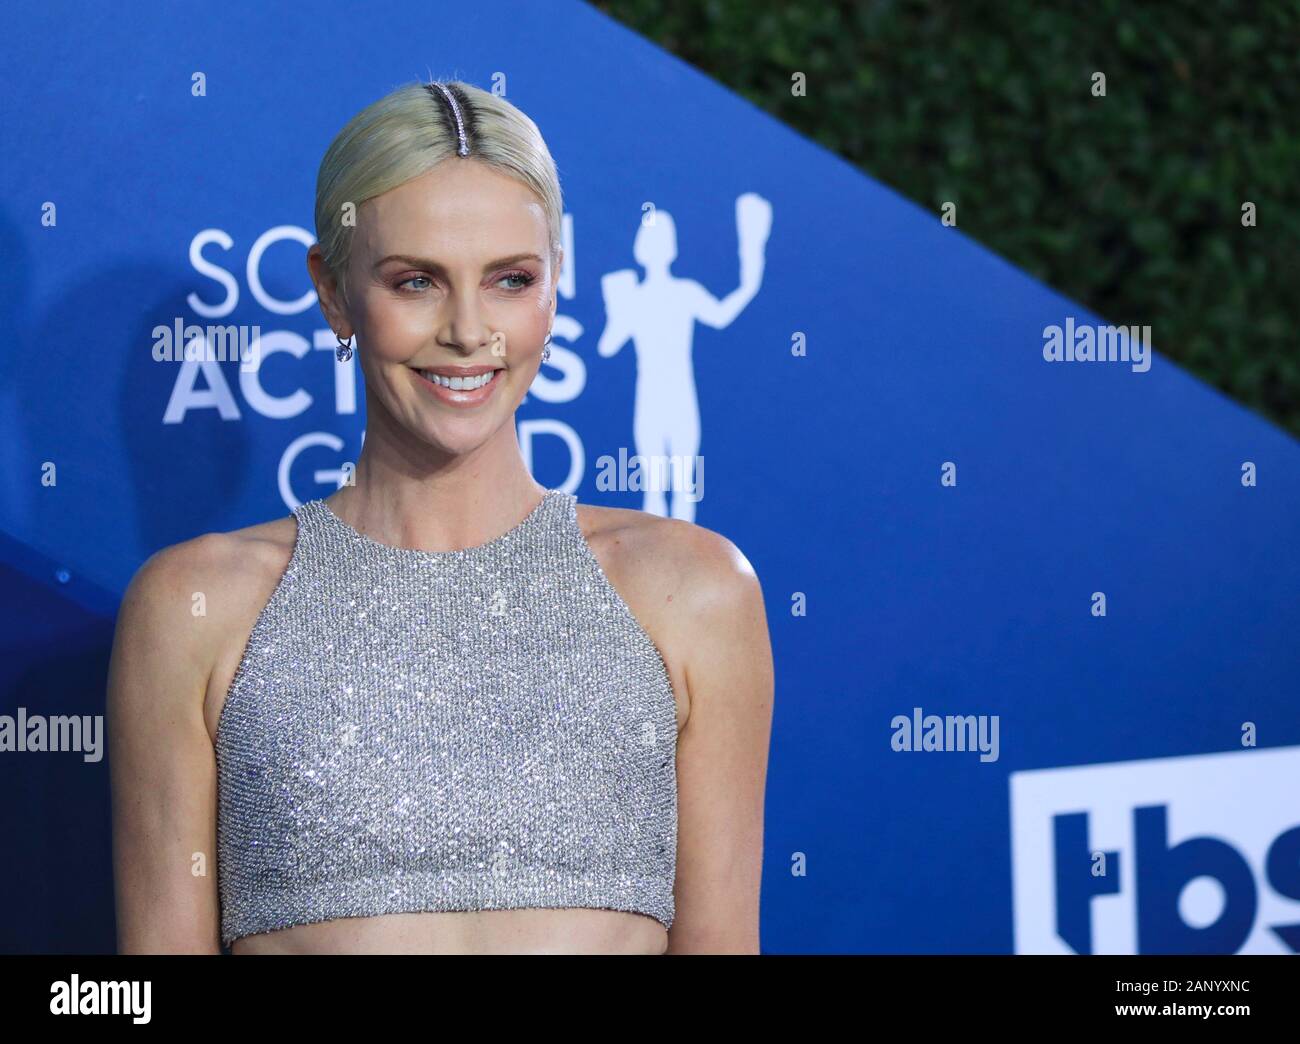 (200120) -- LOS ANGELES, Jan. 20, 2020 (Xinhua) -- Actress Charlize Theron attends the 26th Annual Screen Actors Guild (SAG) Awards held at the Shrine Auditorium in Los Angeles, the United States, Jan. 19, 2020. (Xinhua/Li Ying) Stock Photo